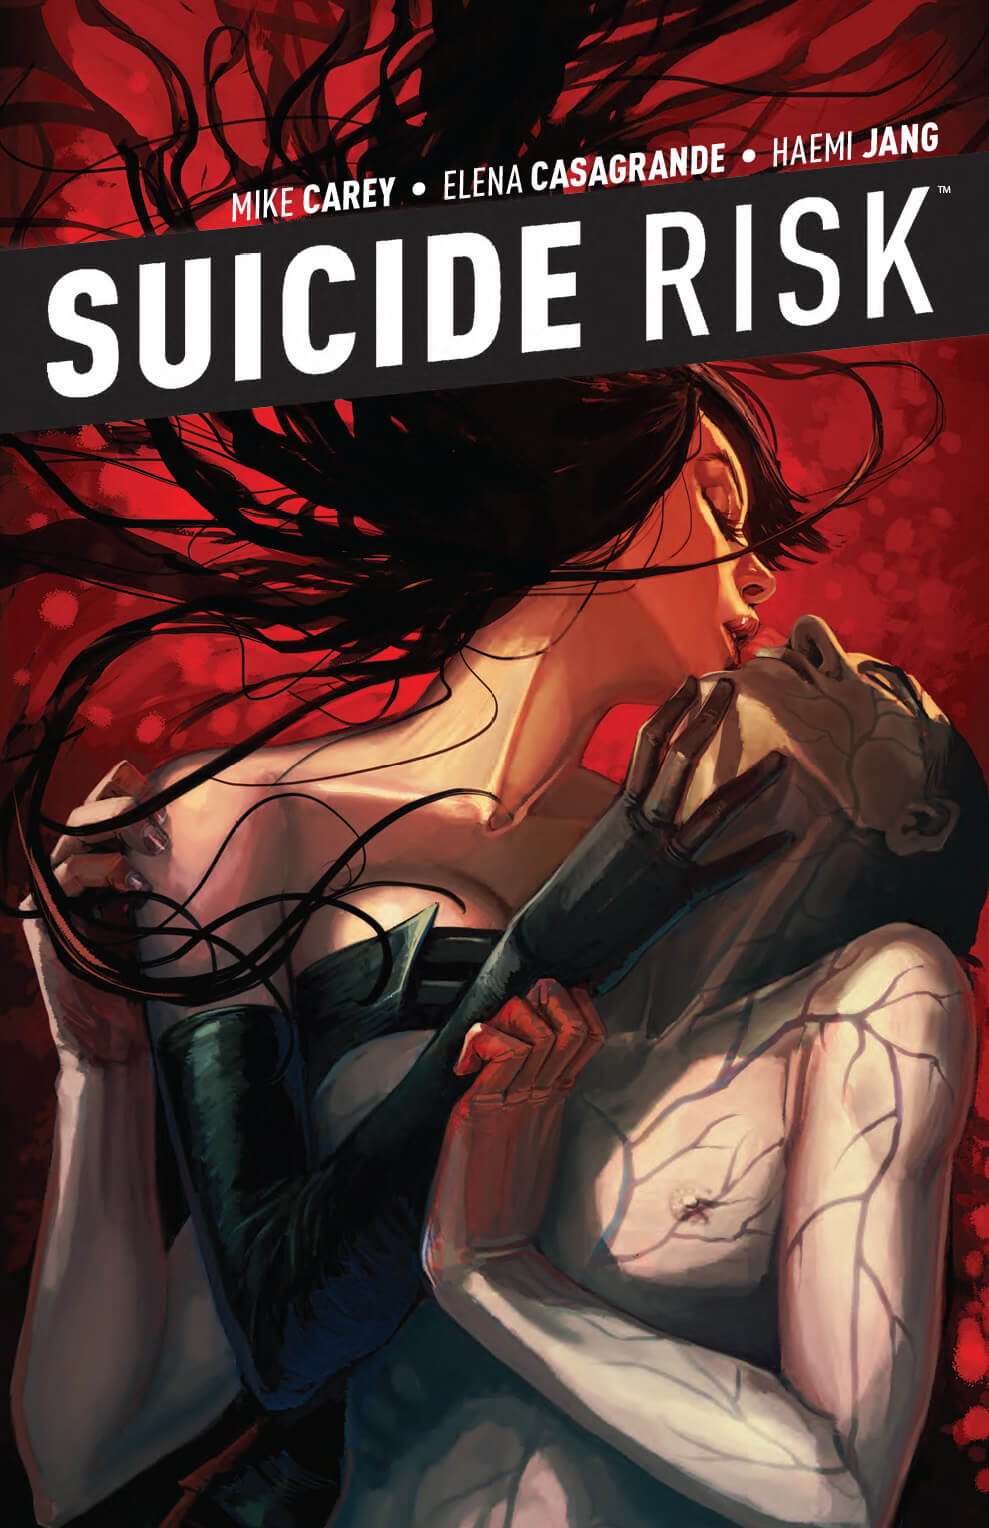 SuicideRisk_V5_cover